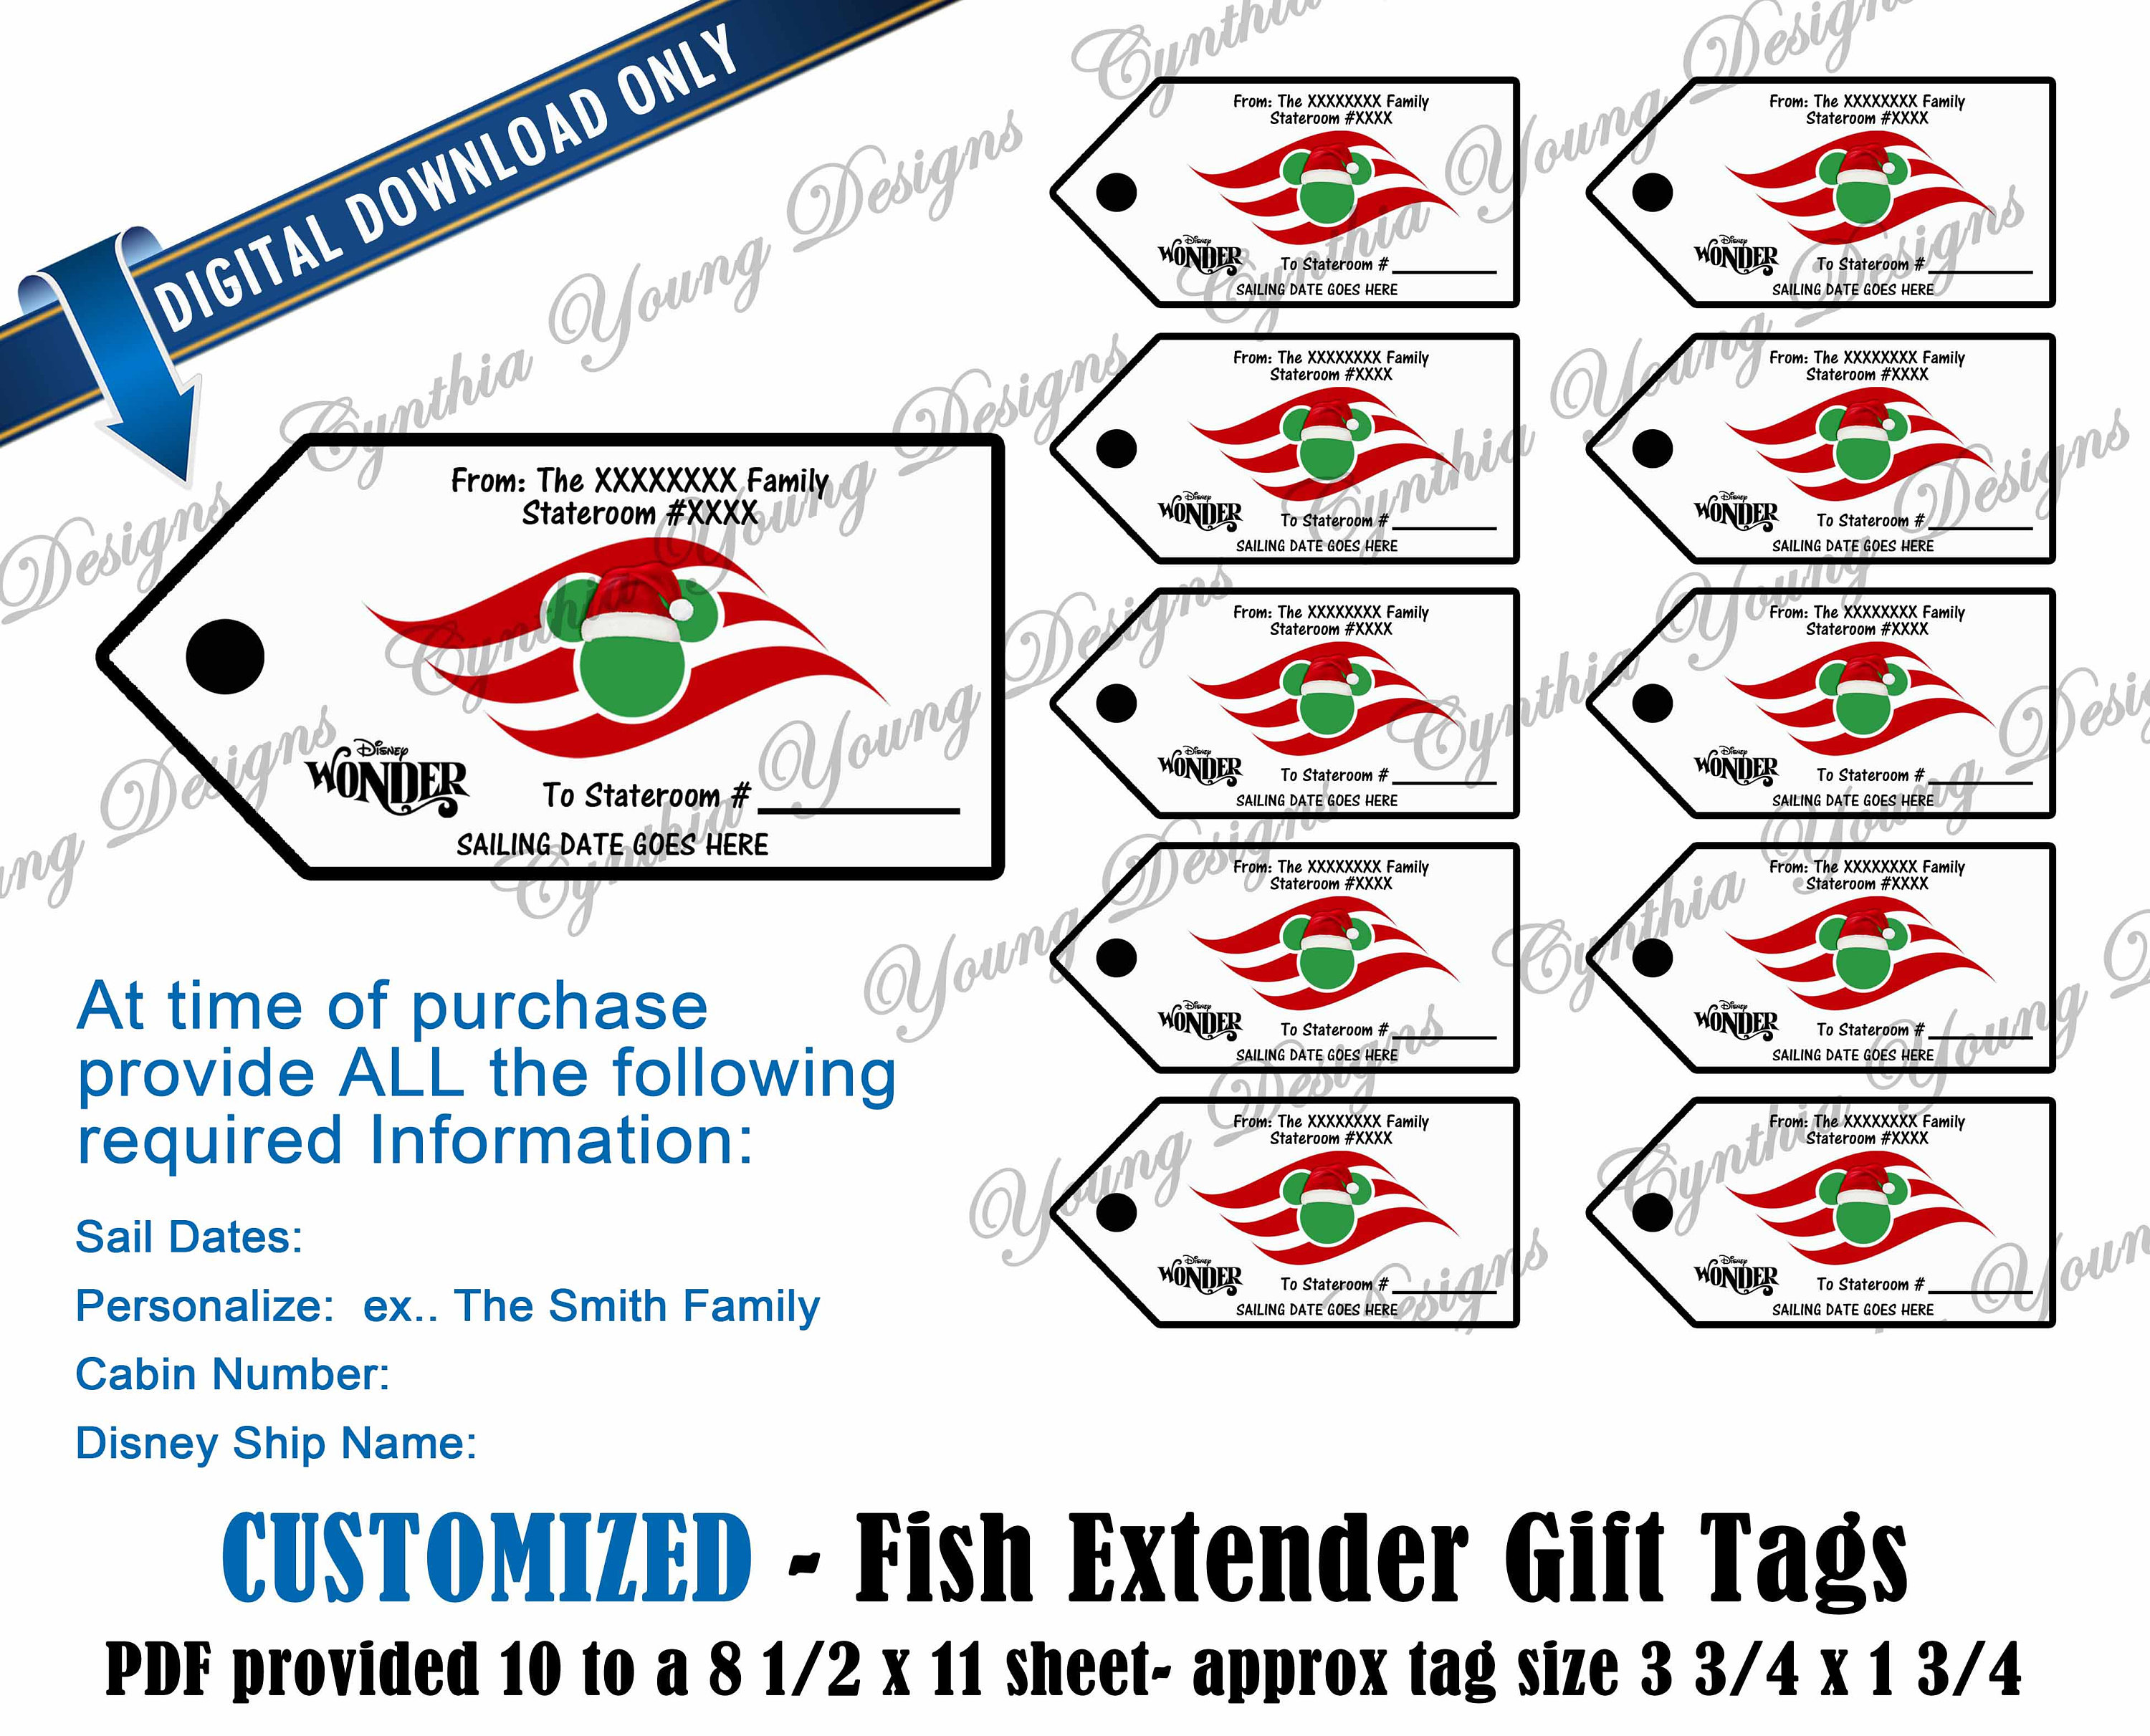 Fish Extender Gift Tags Customized With YOUR Personal Information Christmas  FE Gift Tags DCL Very Merrytime Cruise Digital Download -  Canada